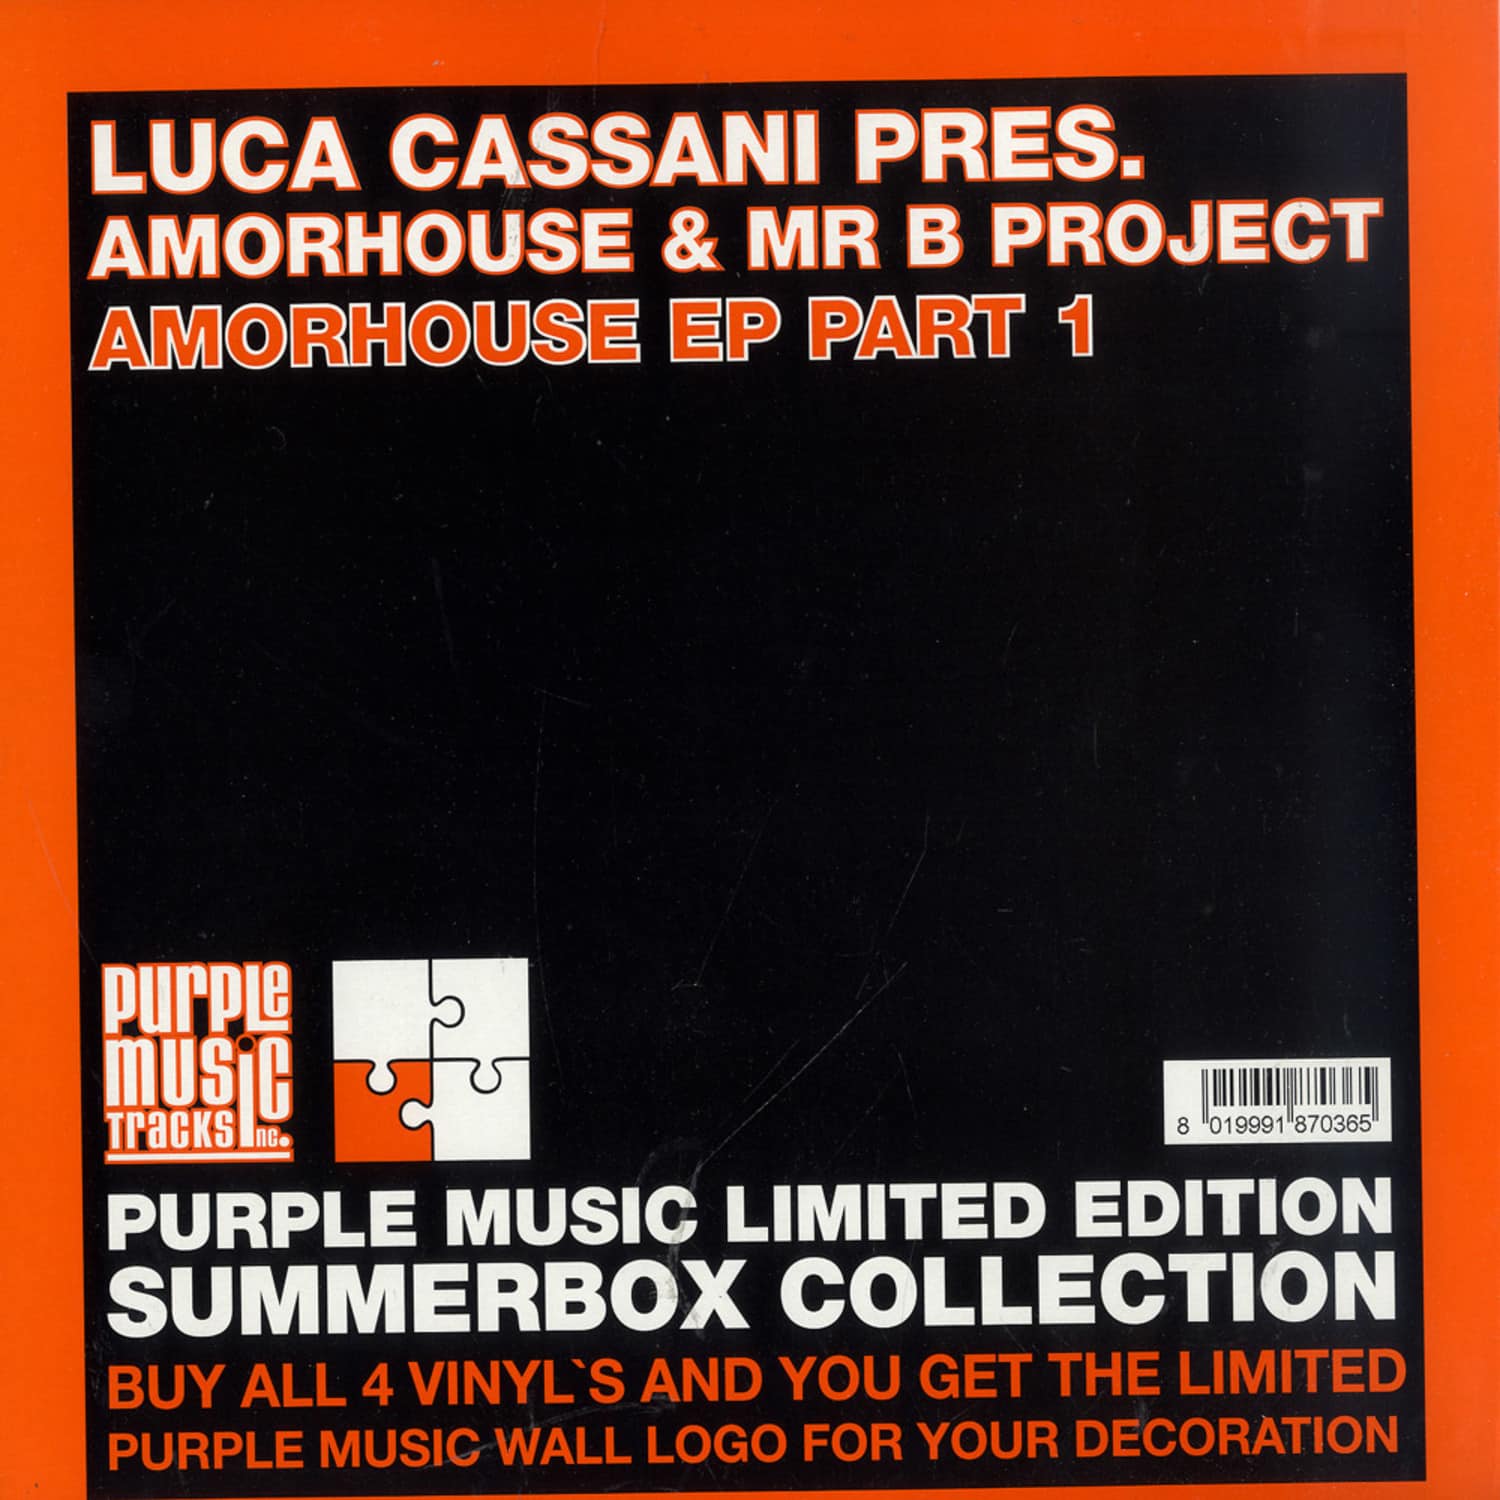 Luca Cassani pres Amorhouse & Mr B Project - AMORHOUSE EP PART 1